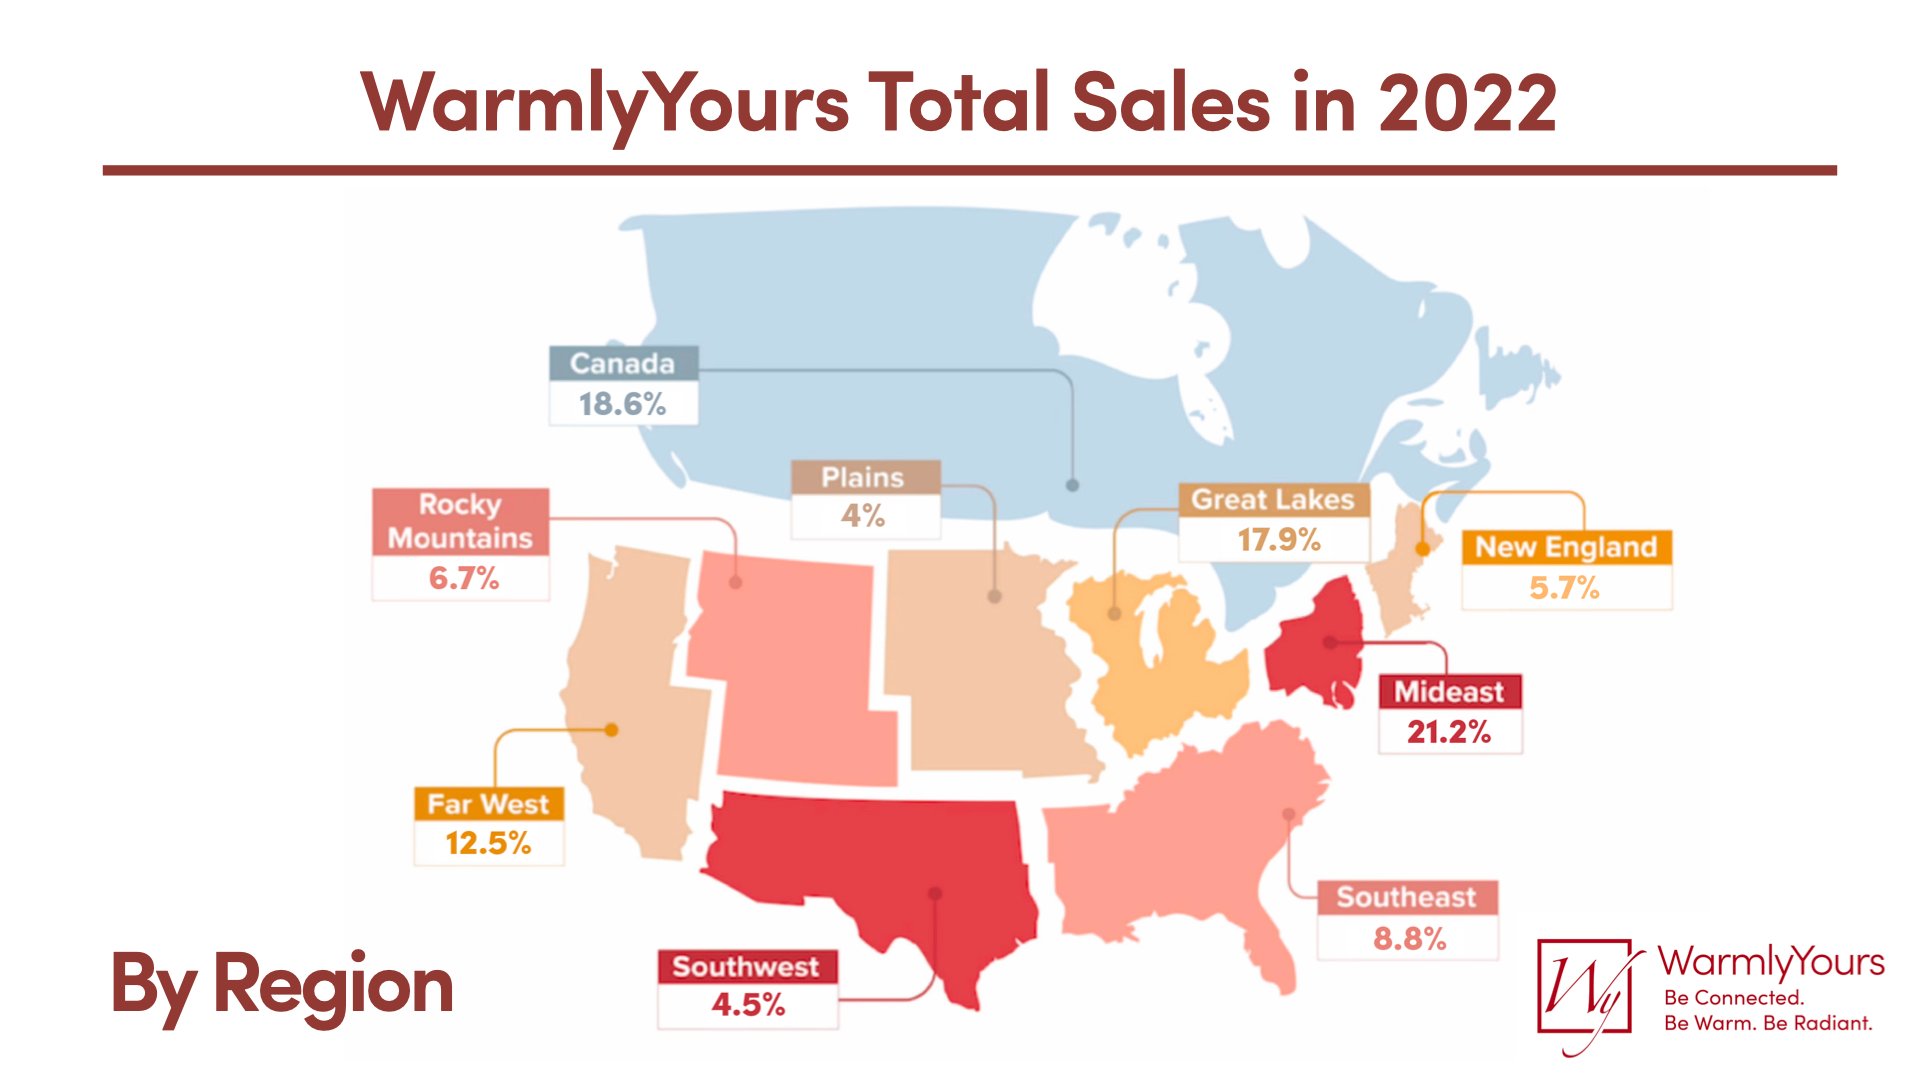 WarmlyYours Q4 2022 Infographic Sales Regions